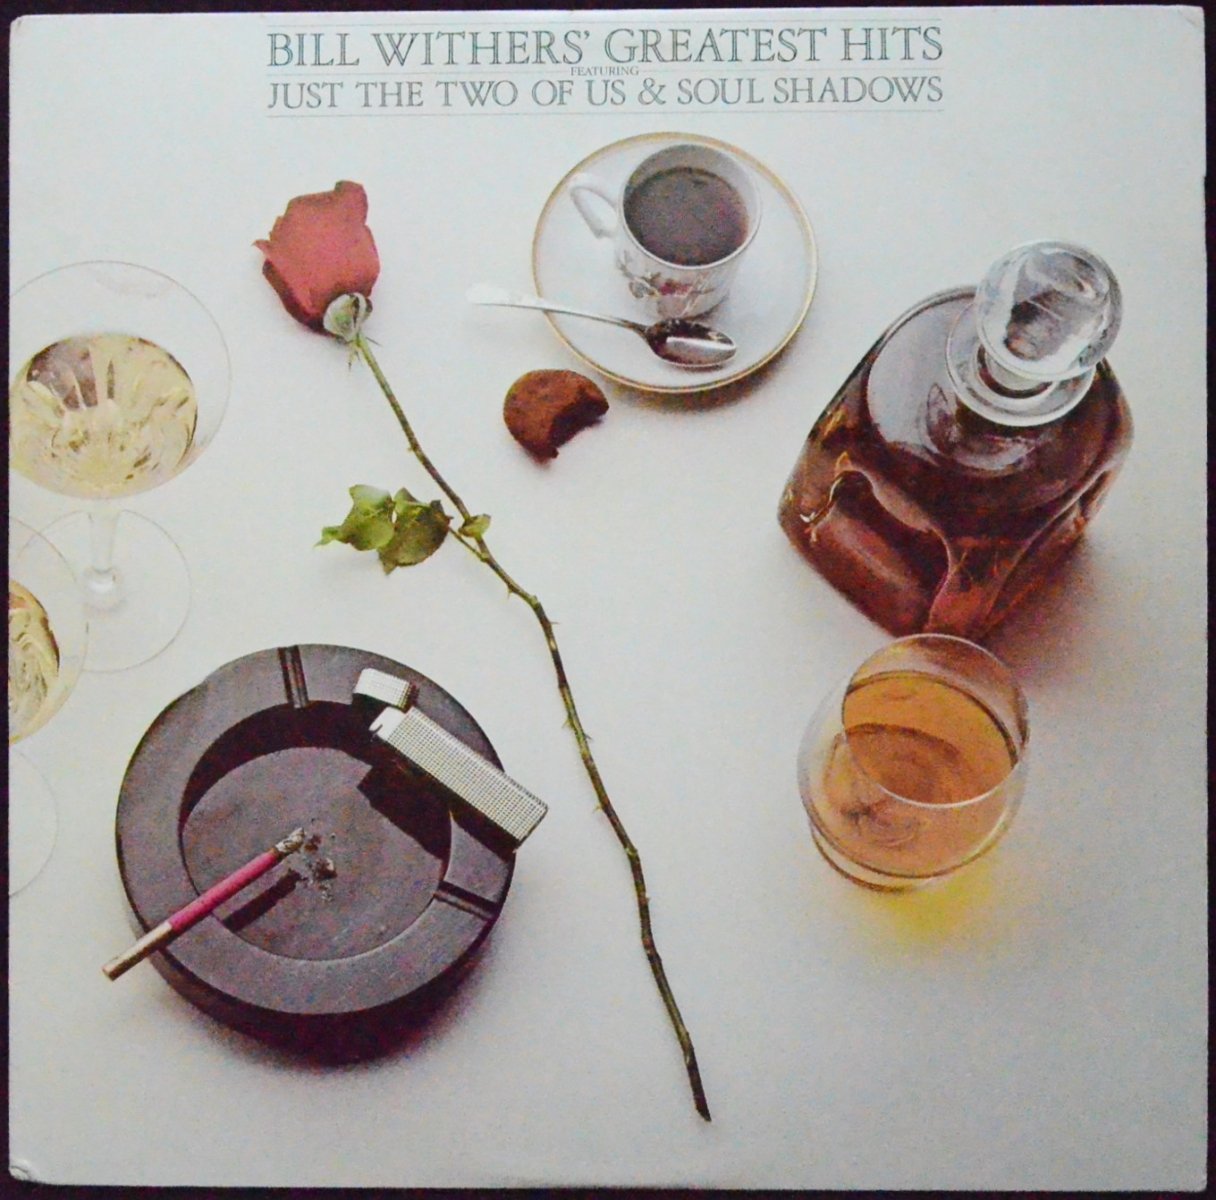 BILL WITHERS ‎/ BILL WITHERS' GREATEST HITS (LP)